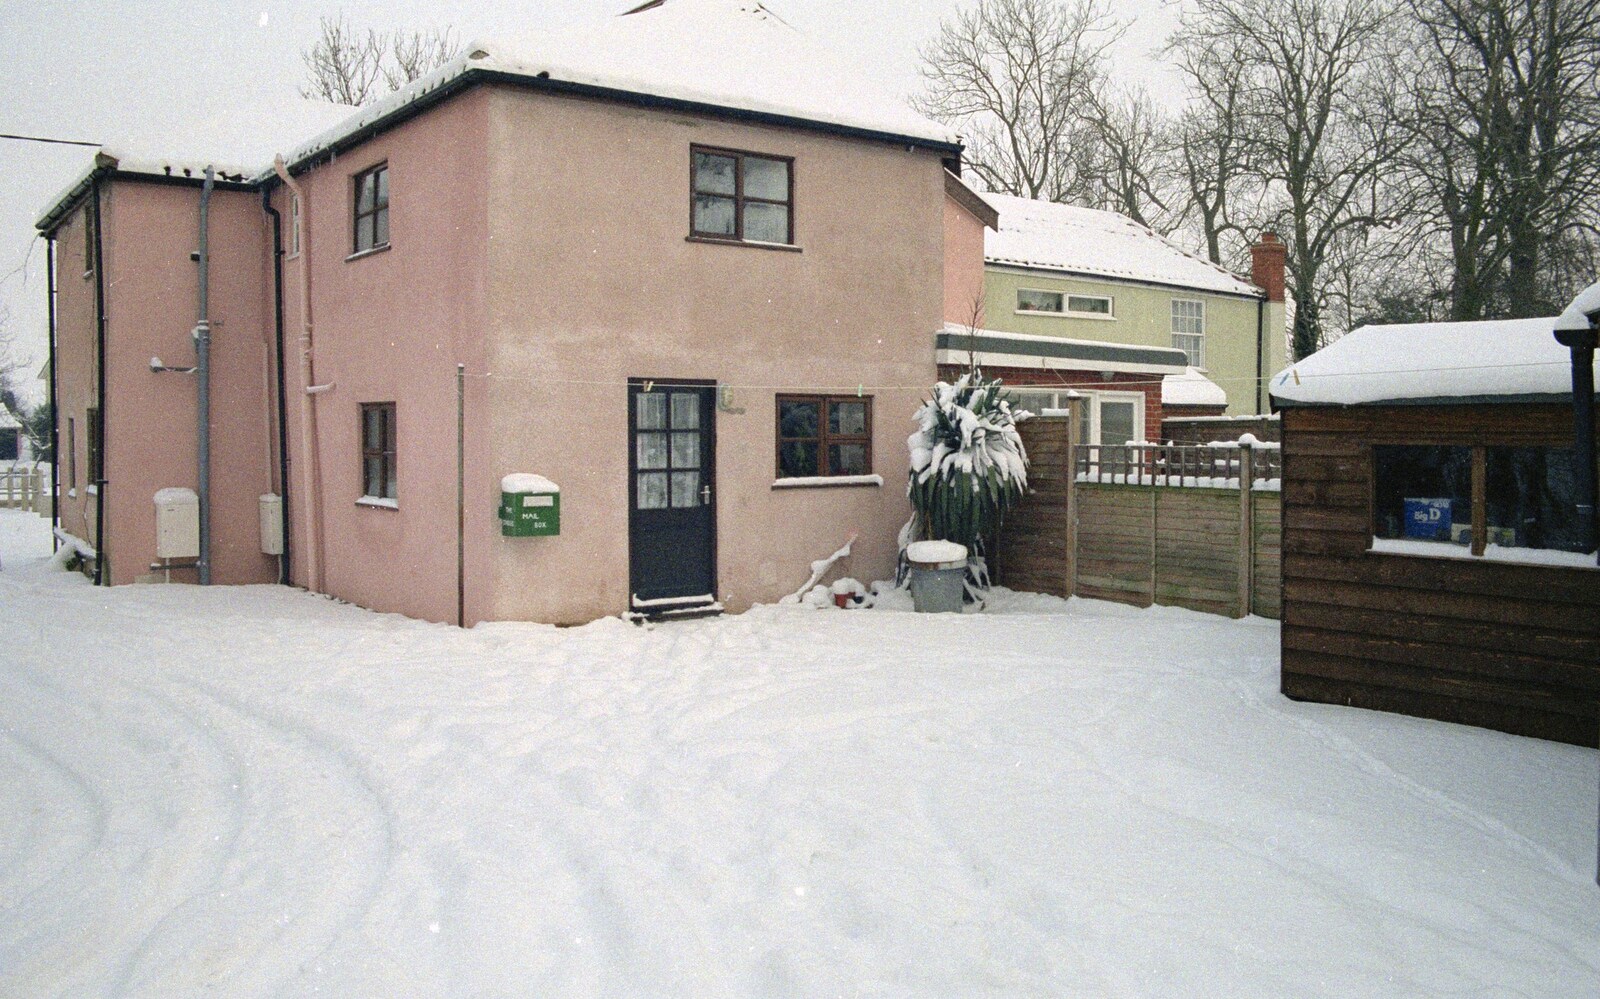 The Stables from Snow Days, Stuston and Norwich, Suffolk and Norfolk - 4th February 1991